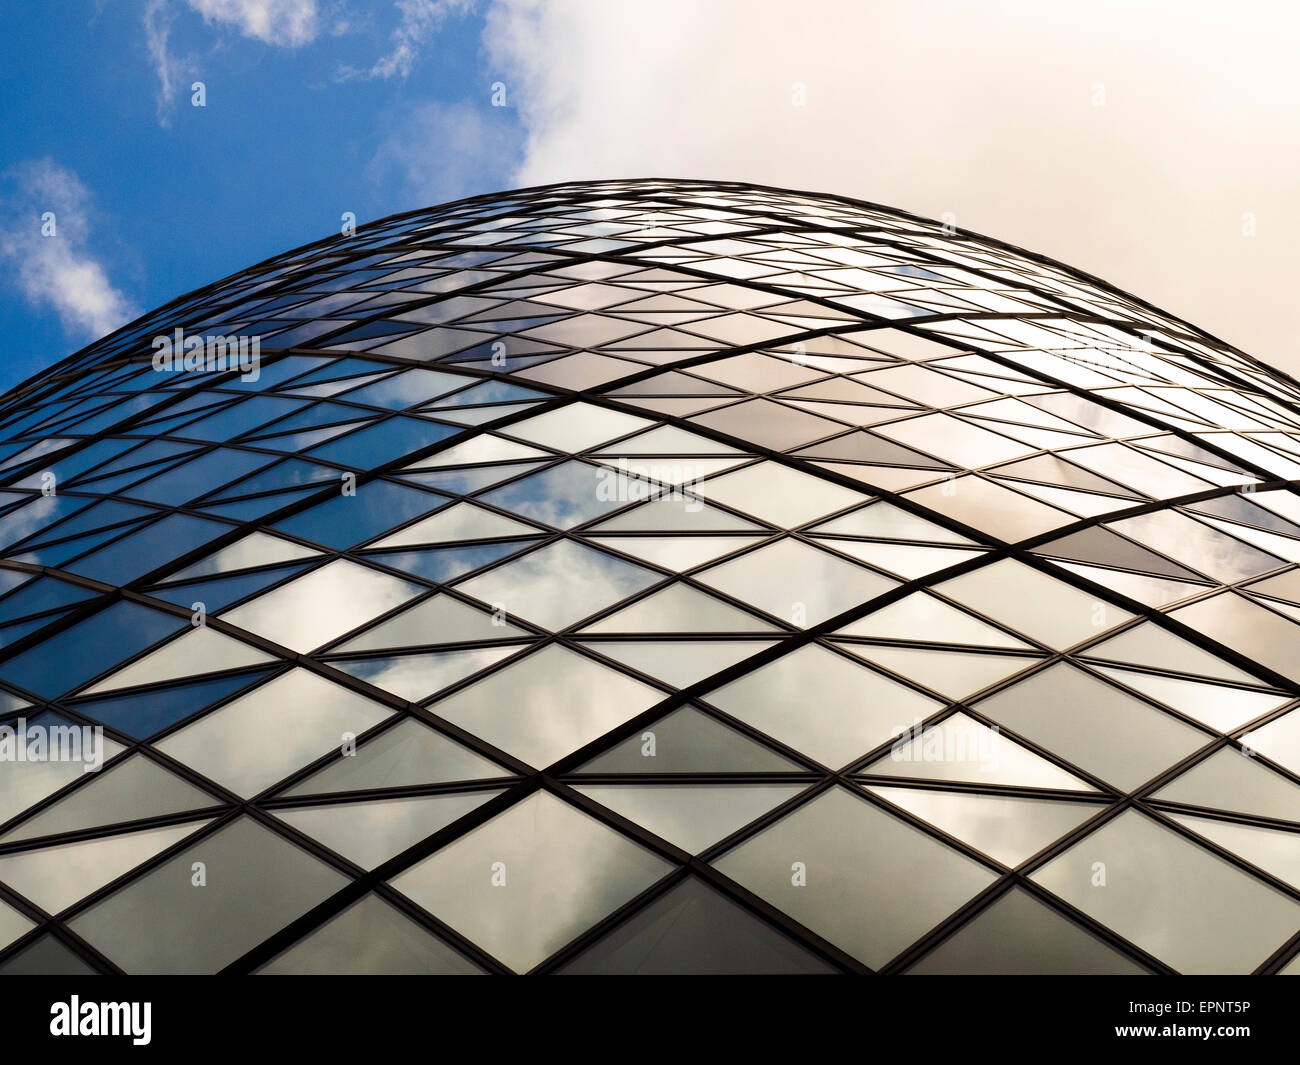 detail of 30 St Mary Axe (widely known informally as The Gherkin and previously as the Swiss Re Building) - London, England Stock Photo